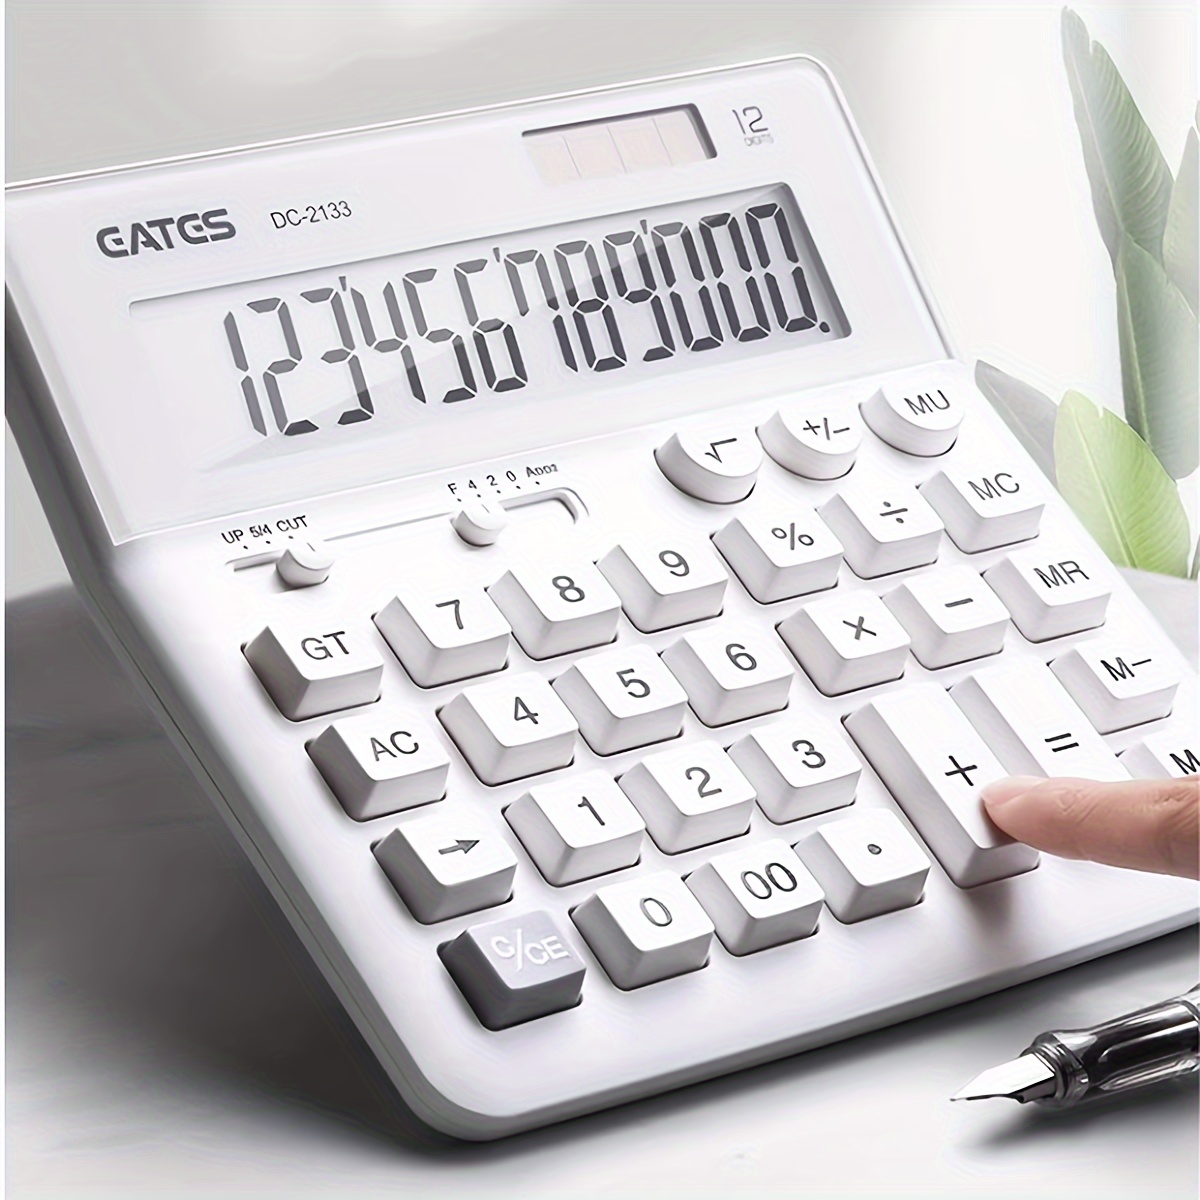 

Sleek White Solar-powered Calculator With 12-digit Led Display - Large, Stylish Desktop Office Computer For Business Use